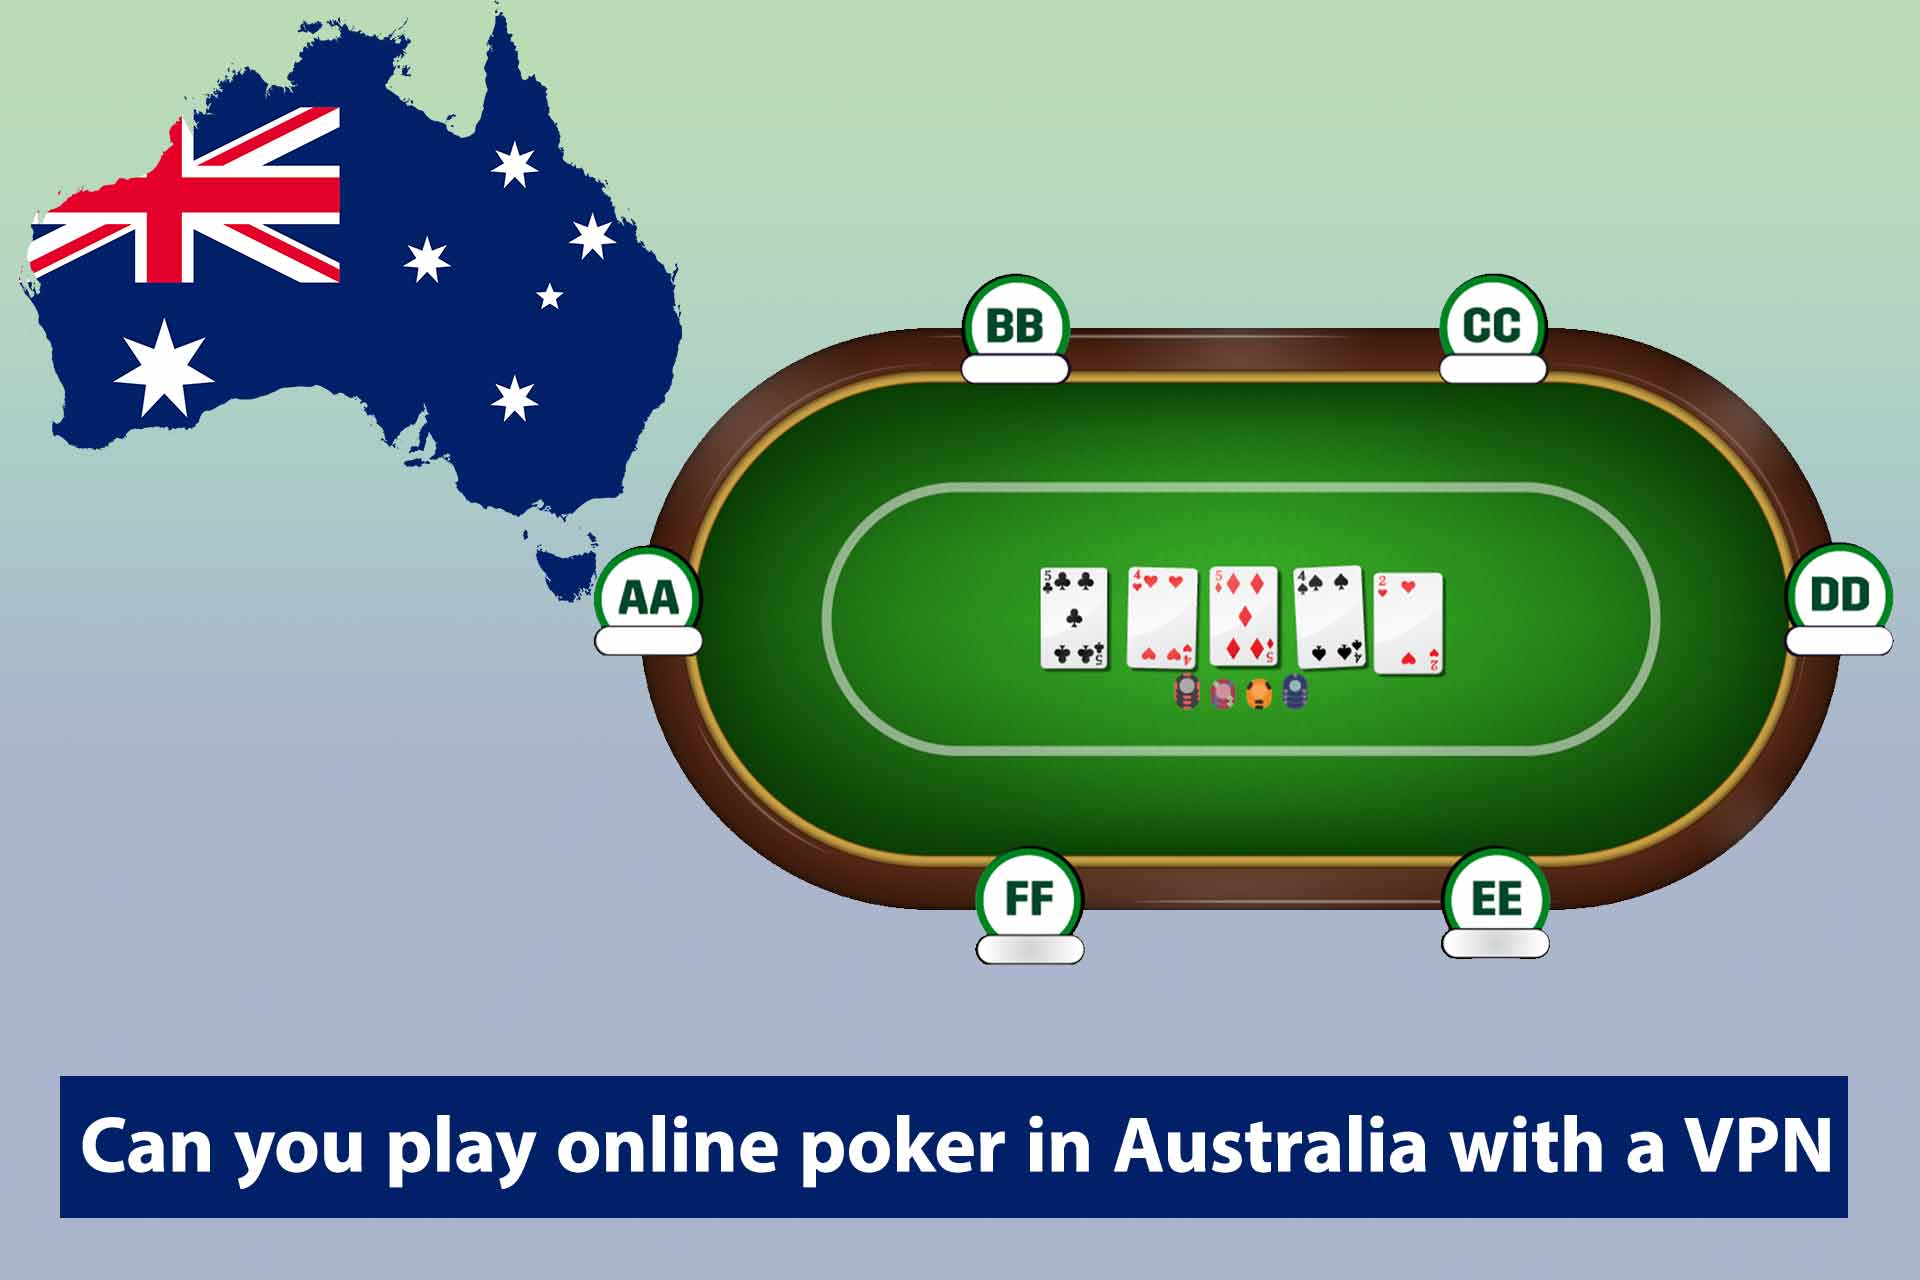 Can you play online poker in Australia with a VPN